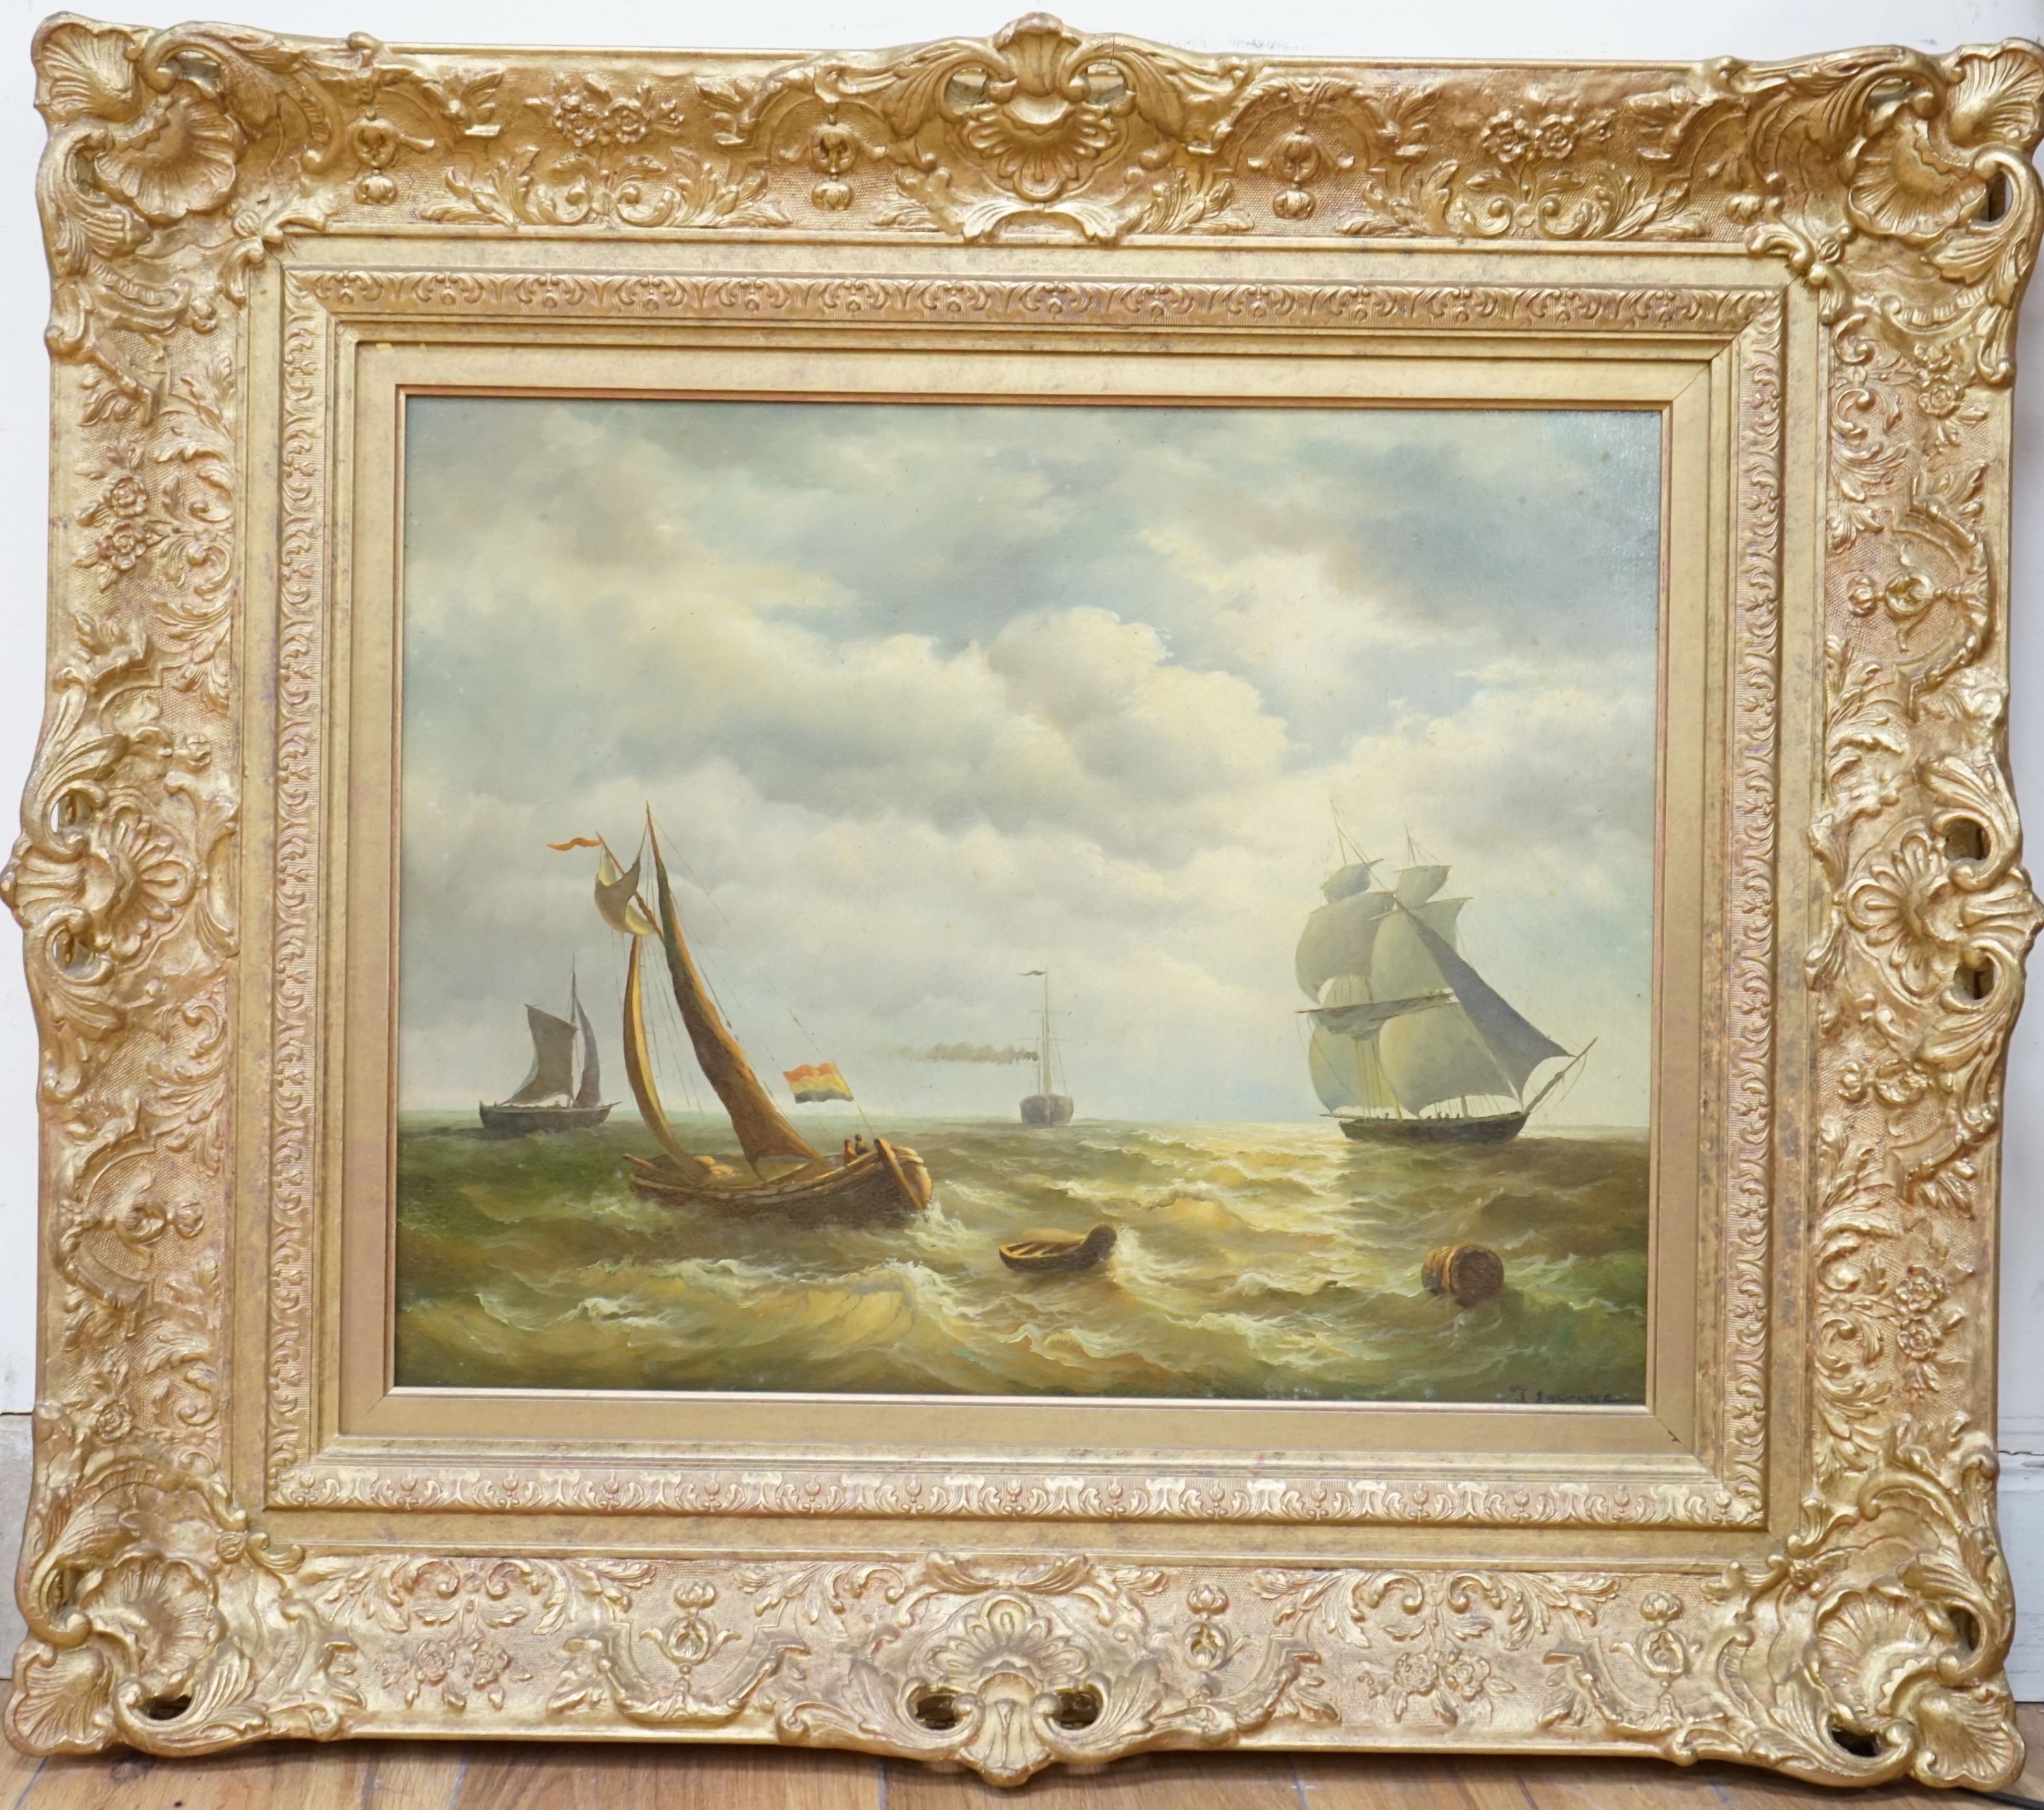 J. Lawrence, oil on board, Shipping off the coast, signed, 39 x 49cm